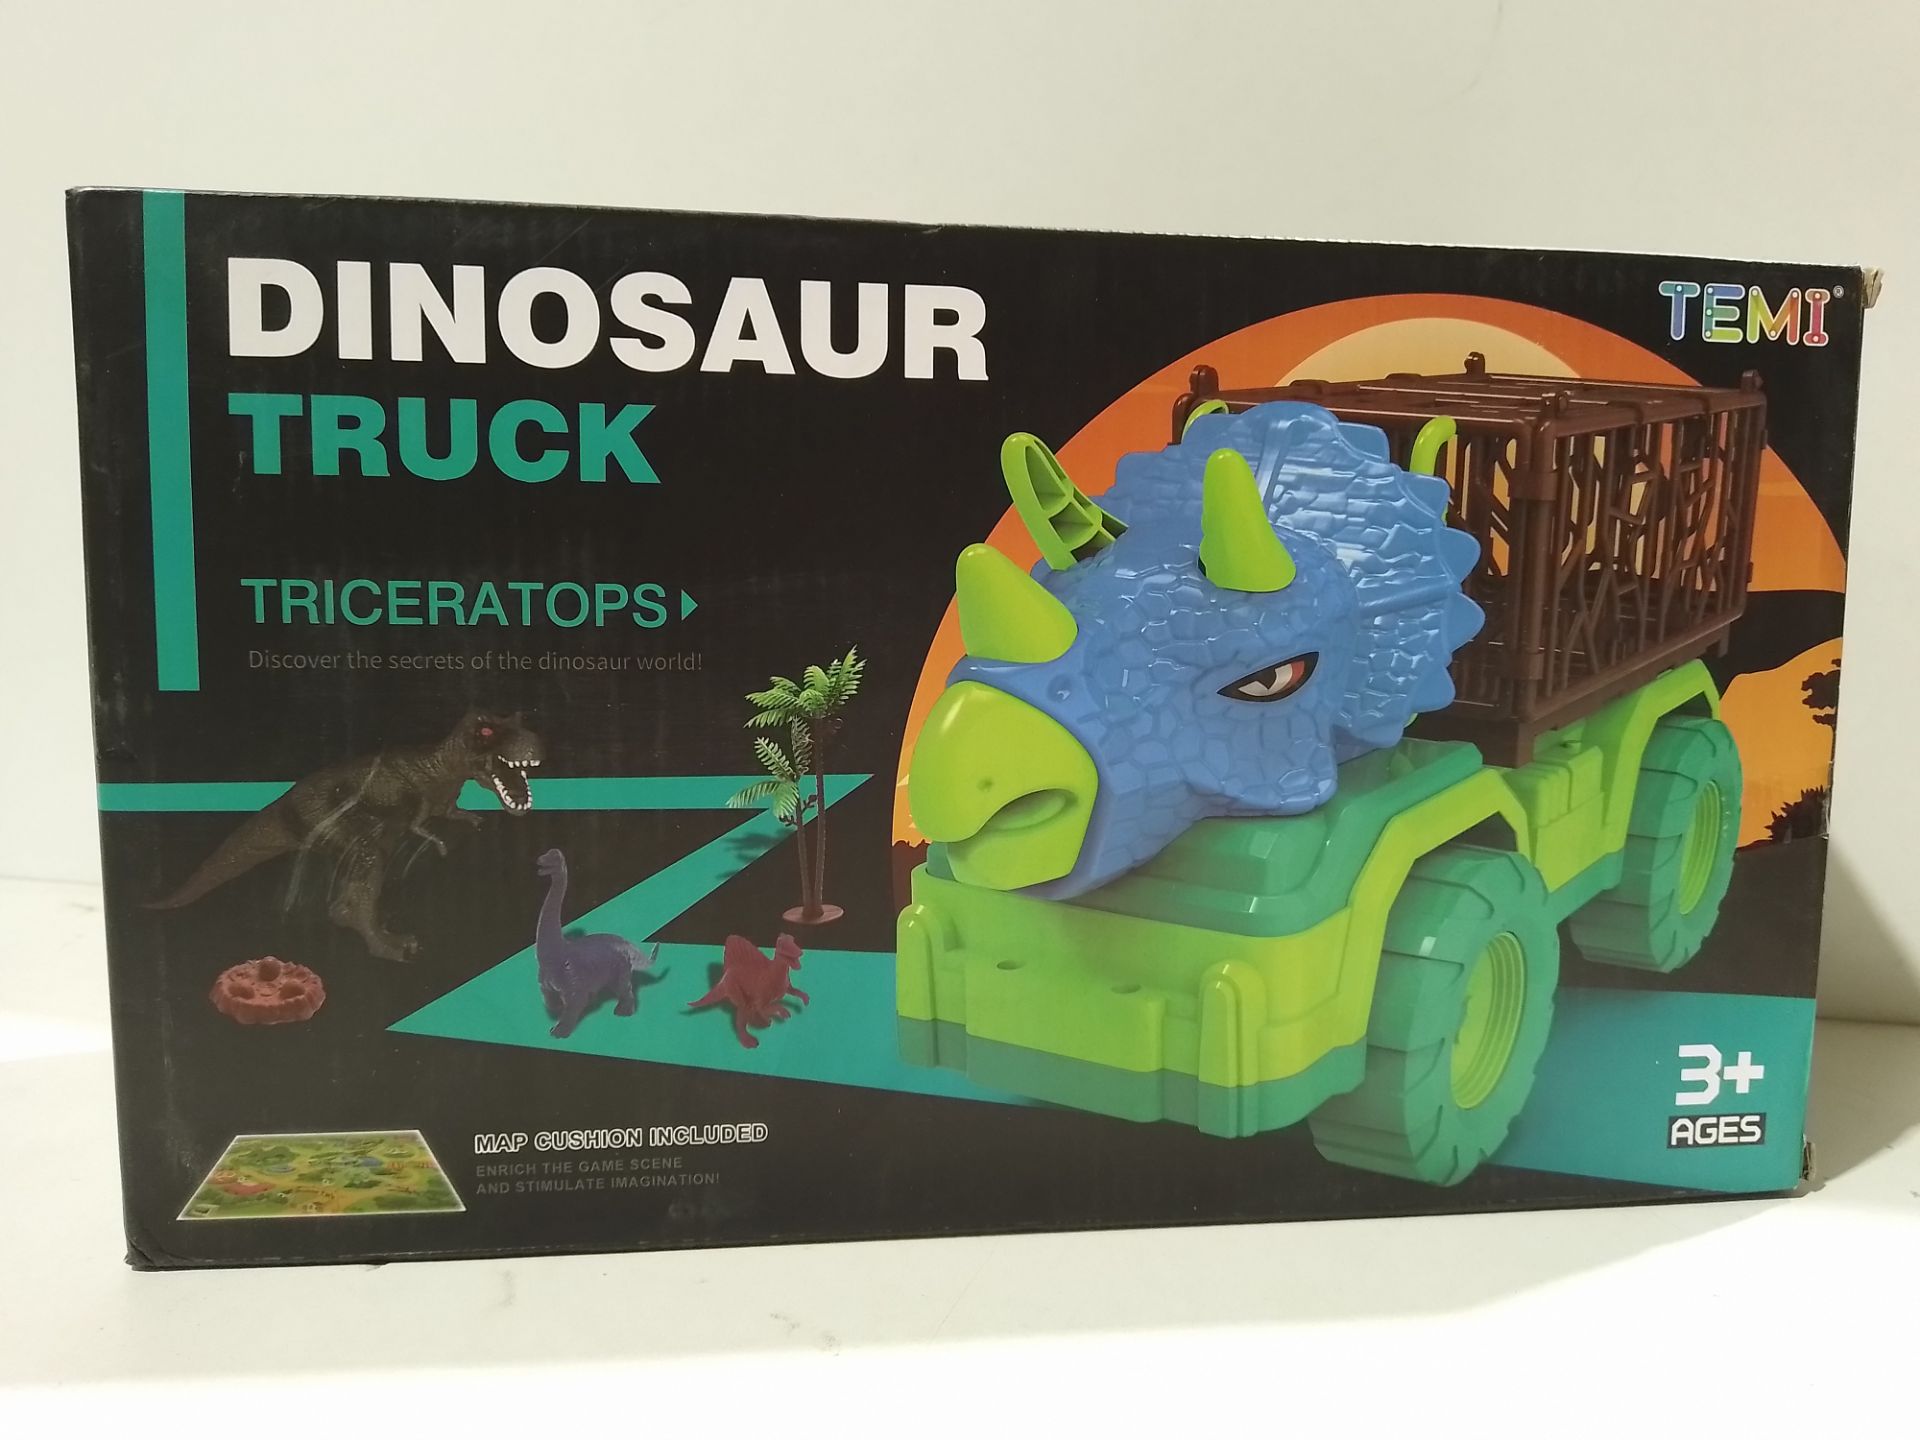 RRP £33.49 TEMI Dinosaur Truck Toy for Kids 3-5 Years Old - Image 2 of 2